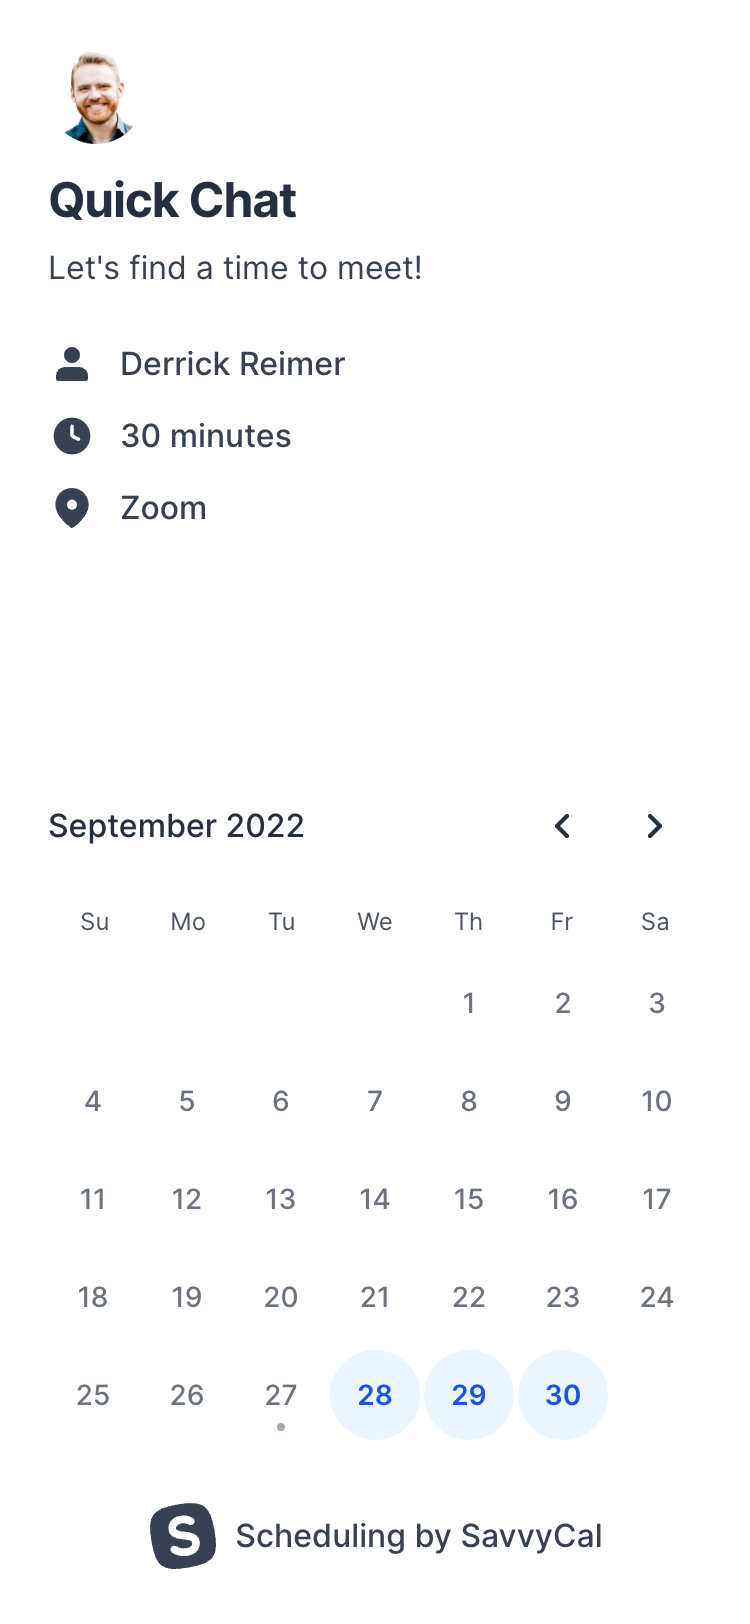 Mobile screenshot of the SavvyCal website. The visible section shows a demo of the SavvyCal interface that includes some meeting details and a calendar where the user can select a meeting date.